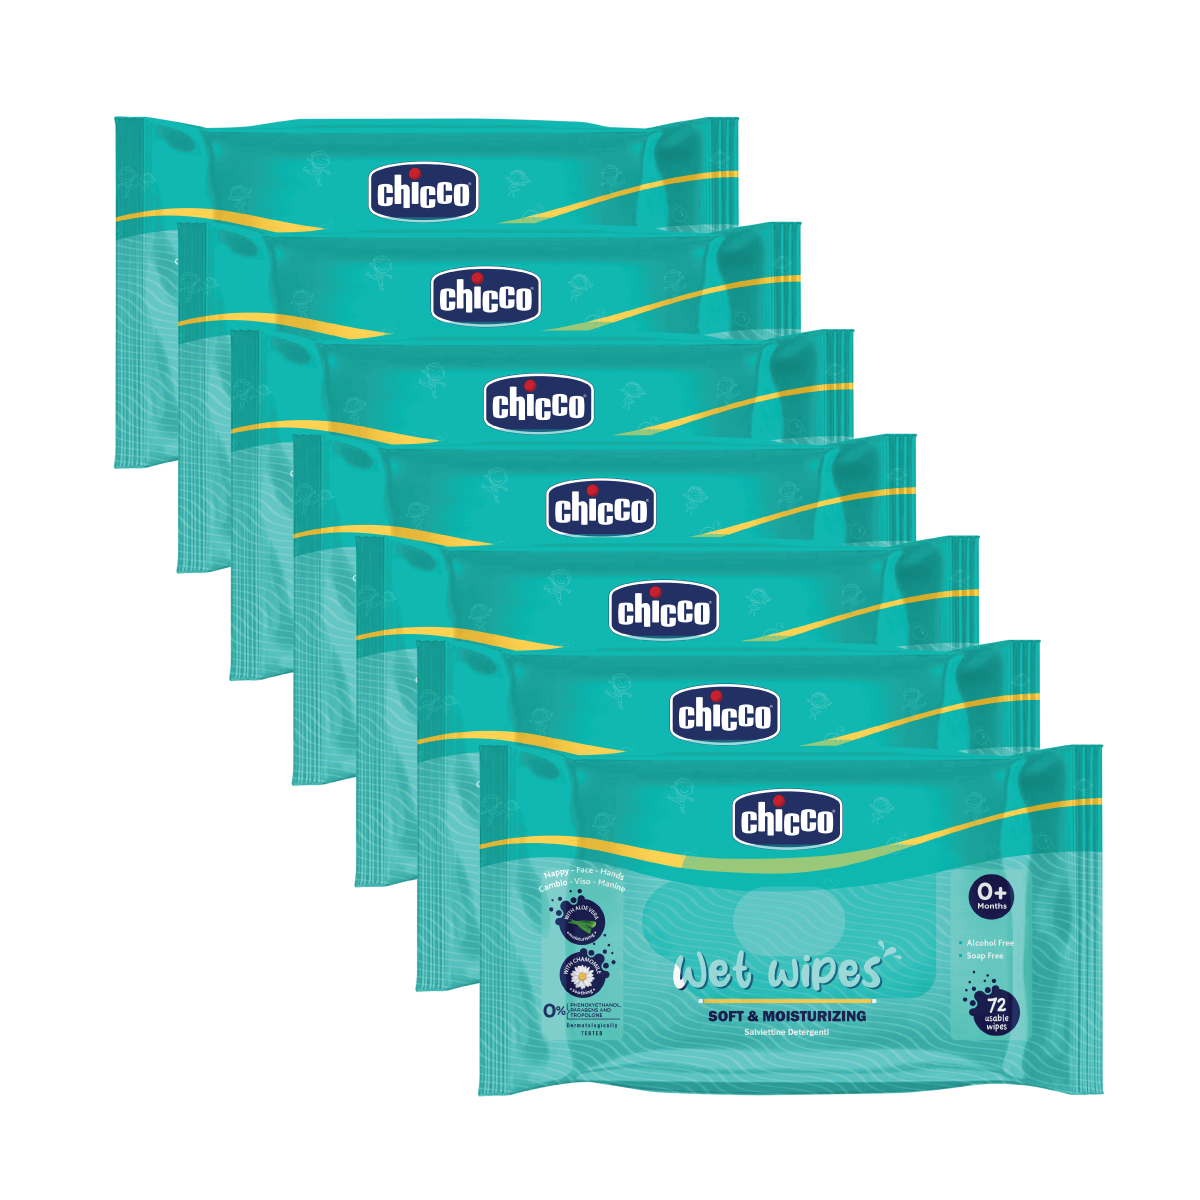 Chicco Wetwipes Pack of 5-504 PCS